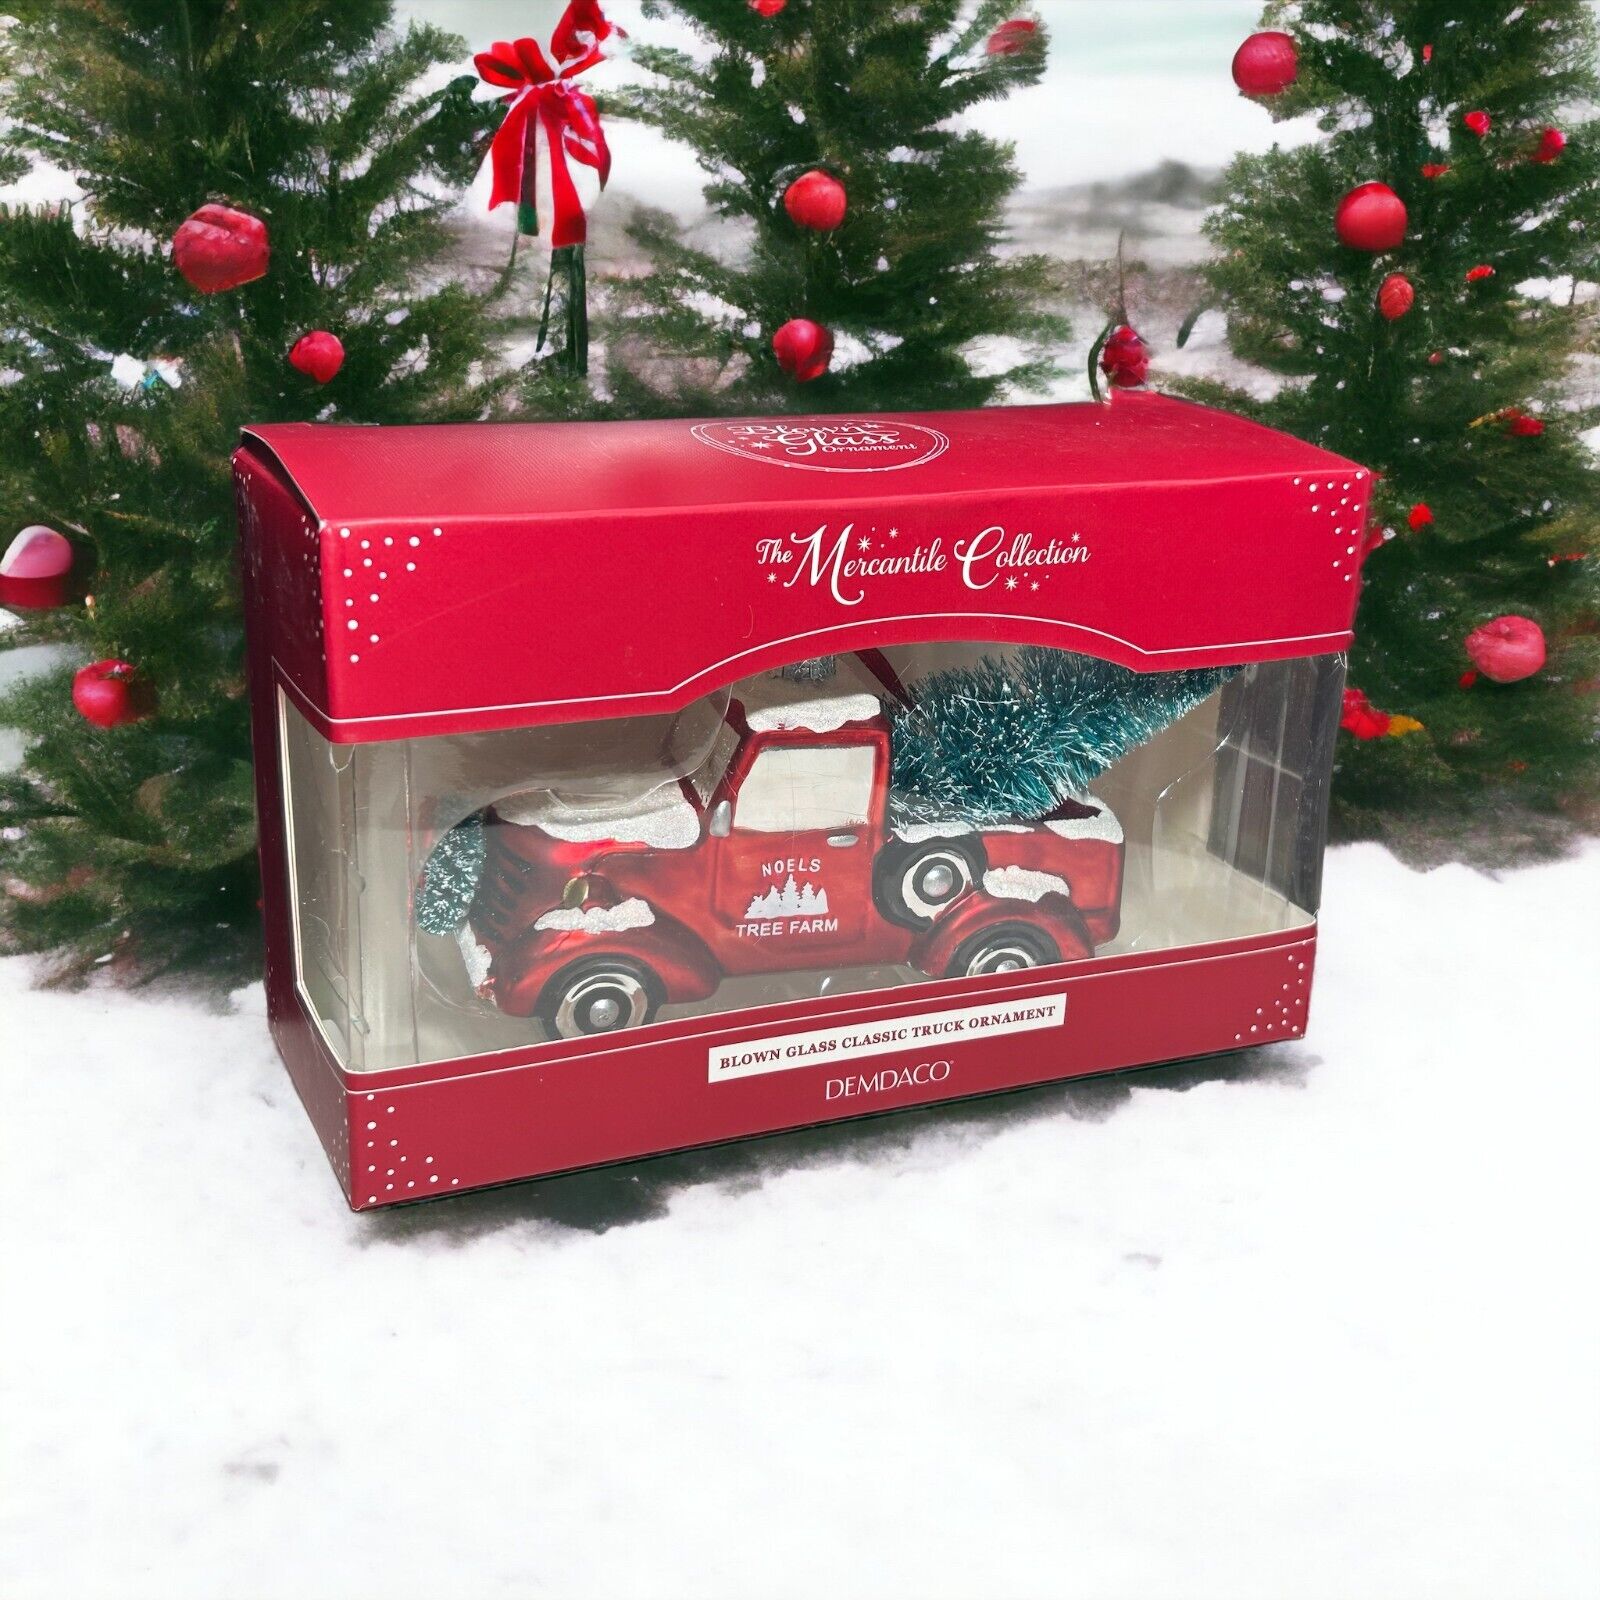 Demdaco Blown Glass Classic Truck Christmas Ornament Mercantile Collection